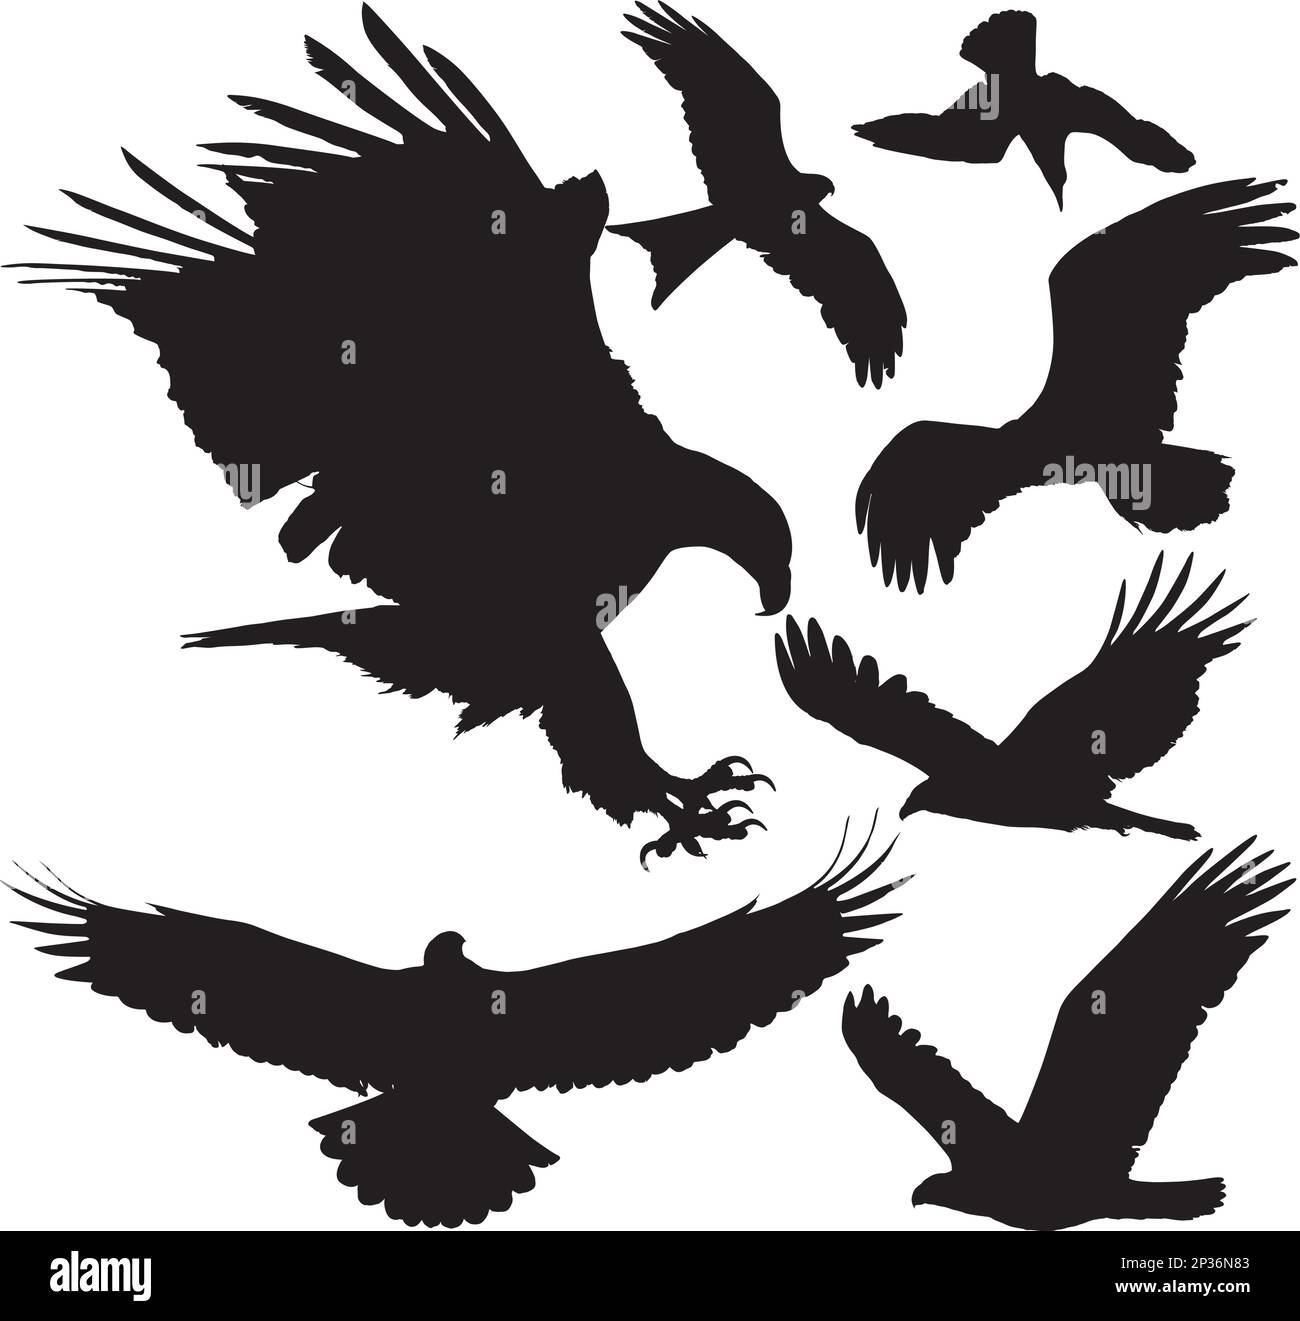 Birds of prey (eagle, hawk, falcon, griffon vulture etc.) vector silhouettes on white background. Layered. Fully editable Stock Vector